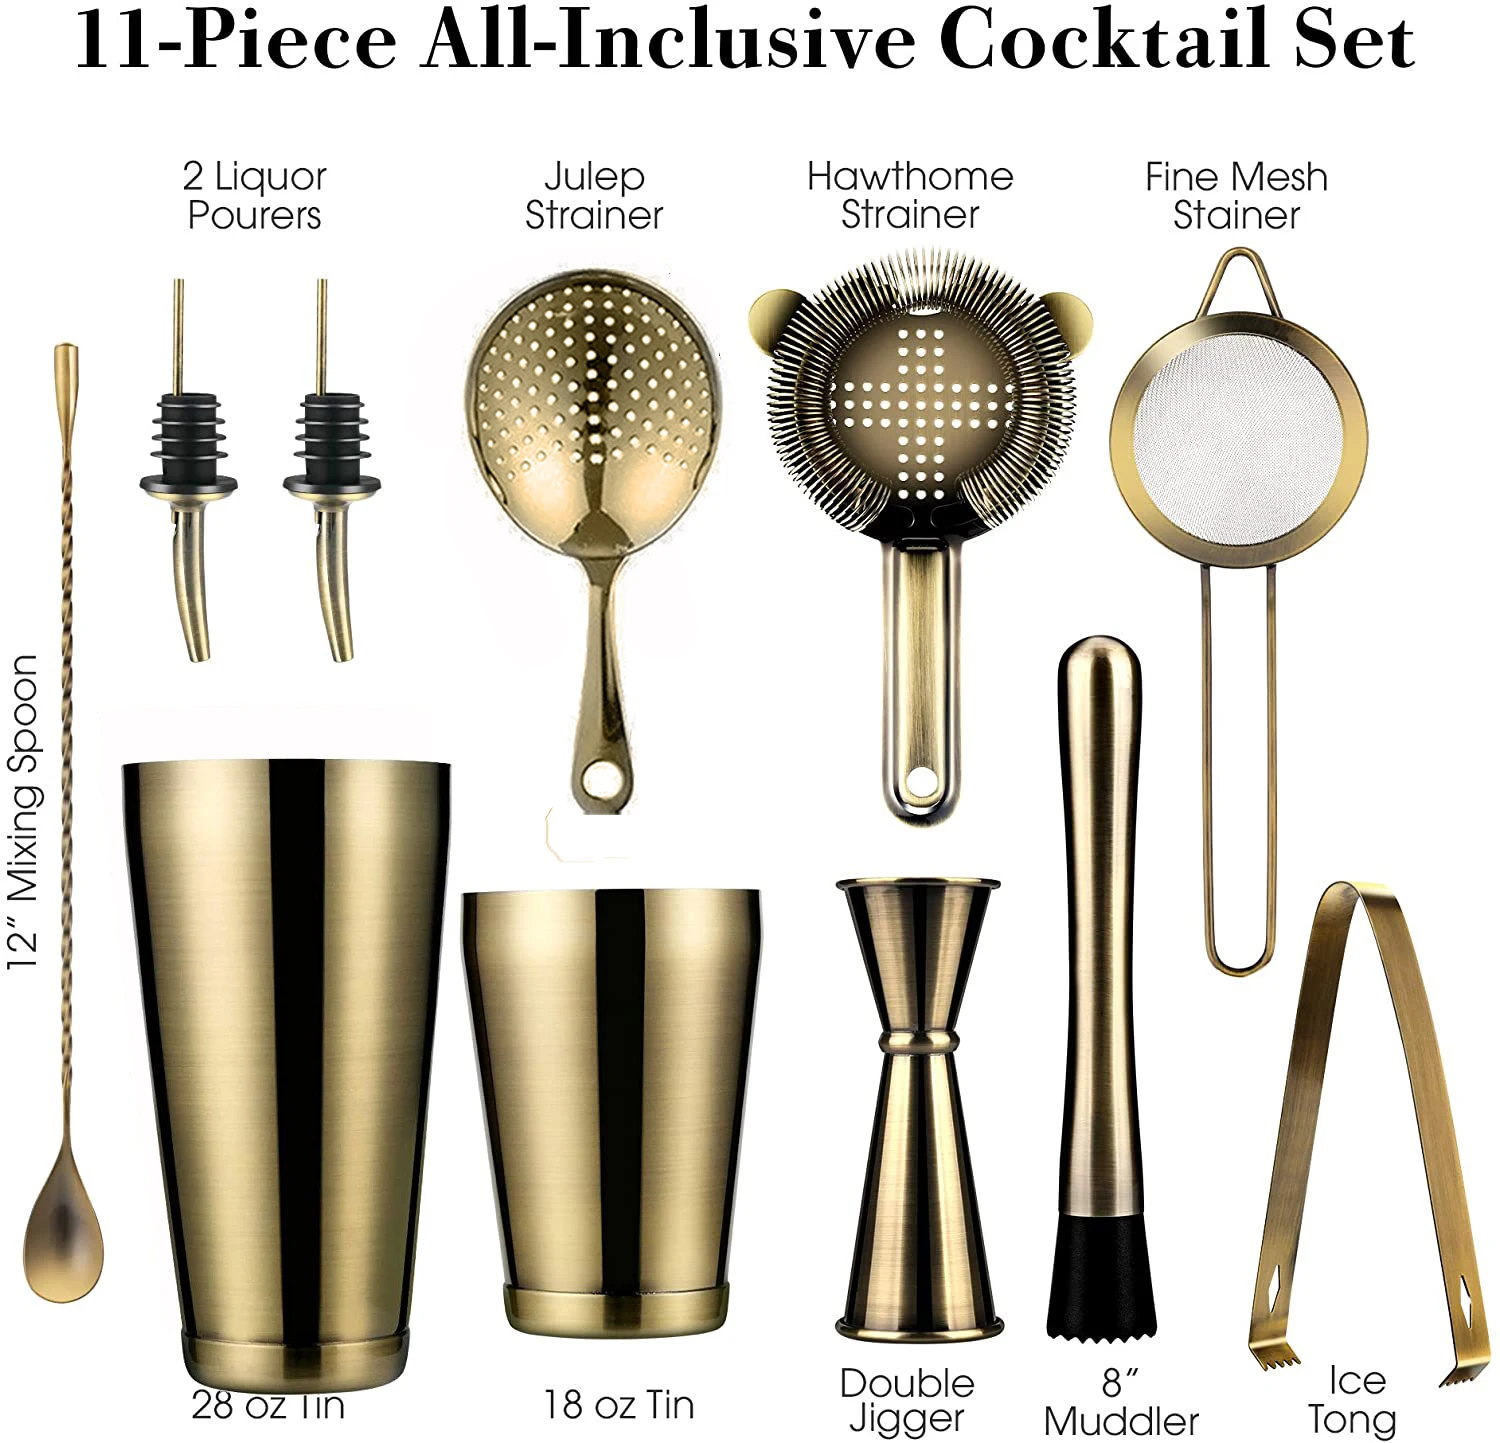 11-Piece Black Cocktail Shaker Bar Set: 2 Weighted Boston Shakers, Cocktail